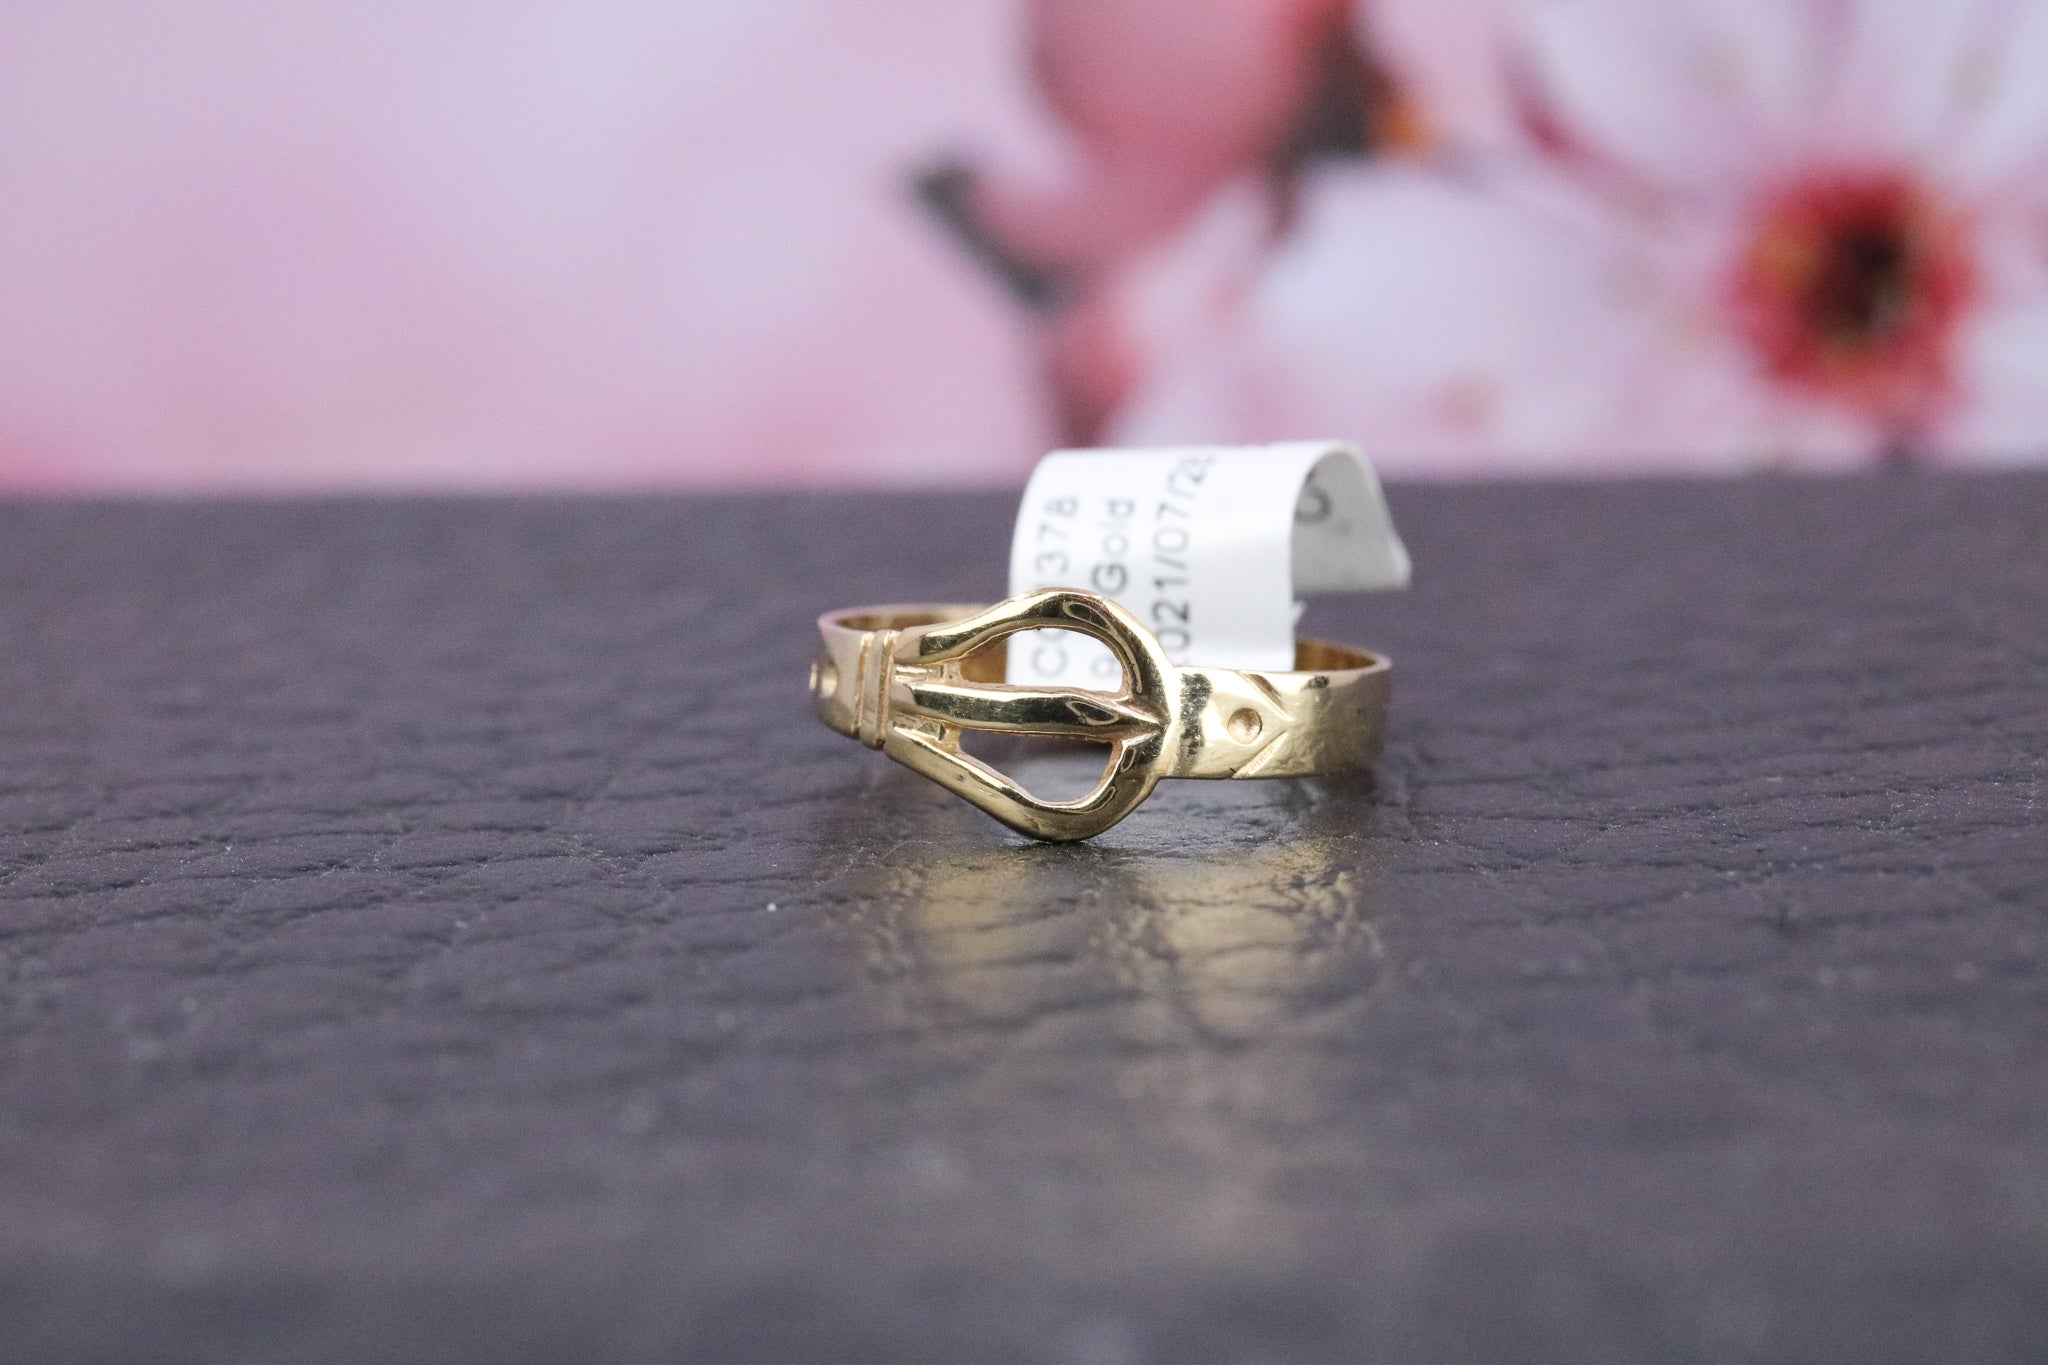 9ct Gold Buckle Ring - CO1378 - Hallmark Jewellers Formby & The Jewellers Bench Widnes